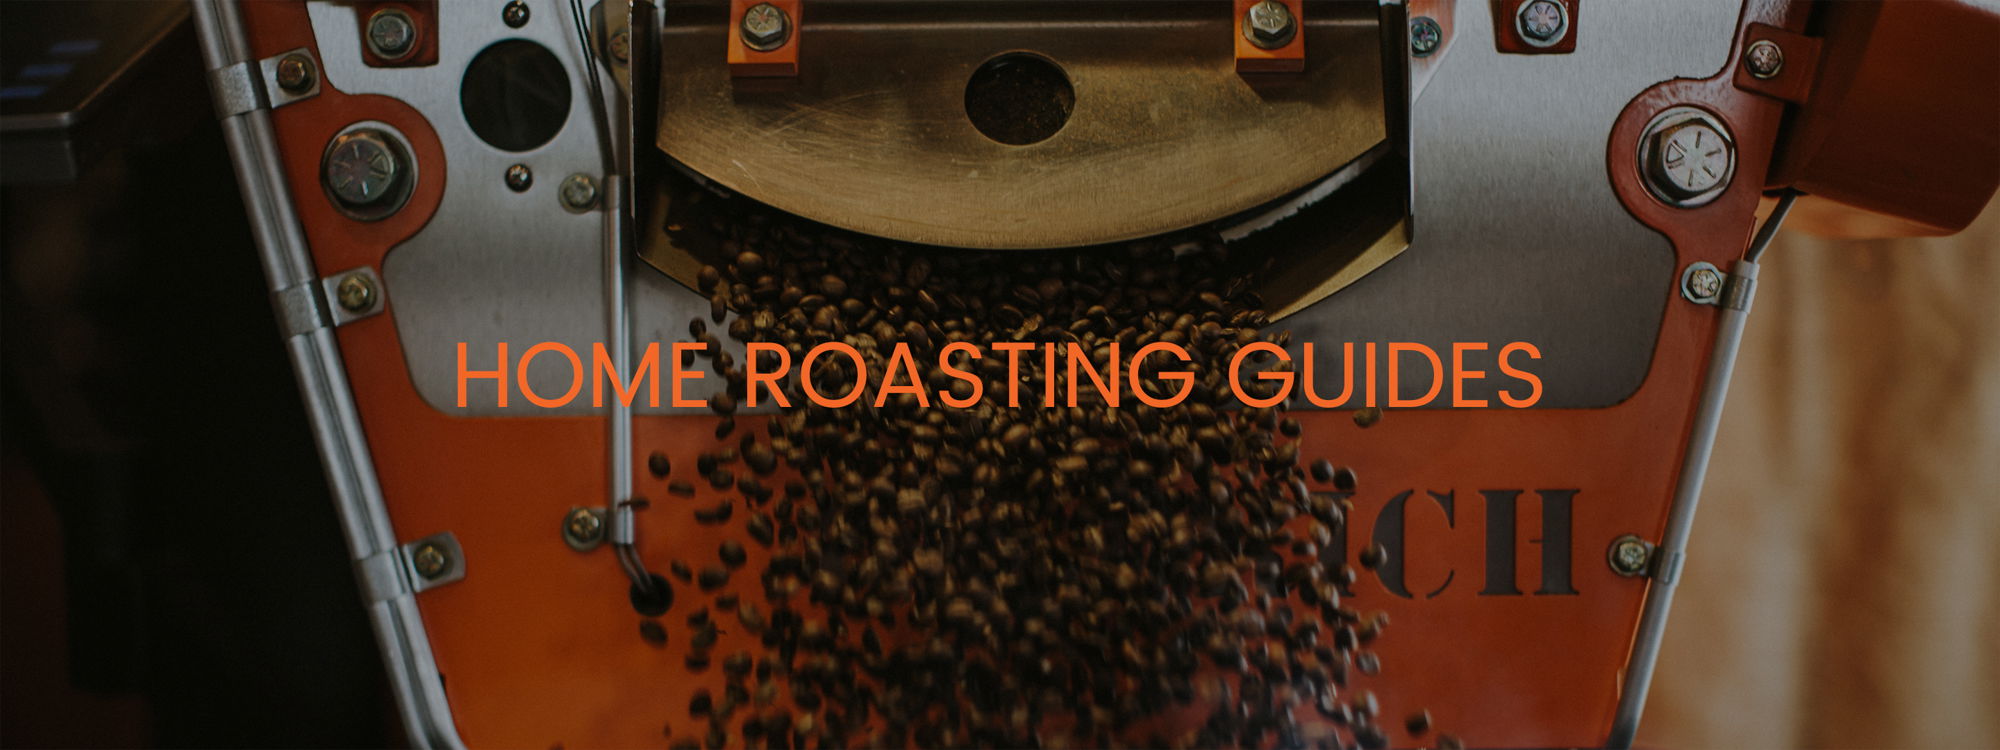 HOME ROASTING GUIDES - COFFEE EXITING ROASTER